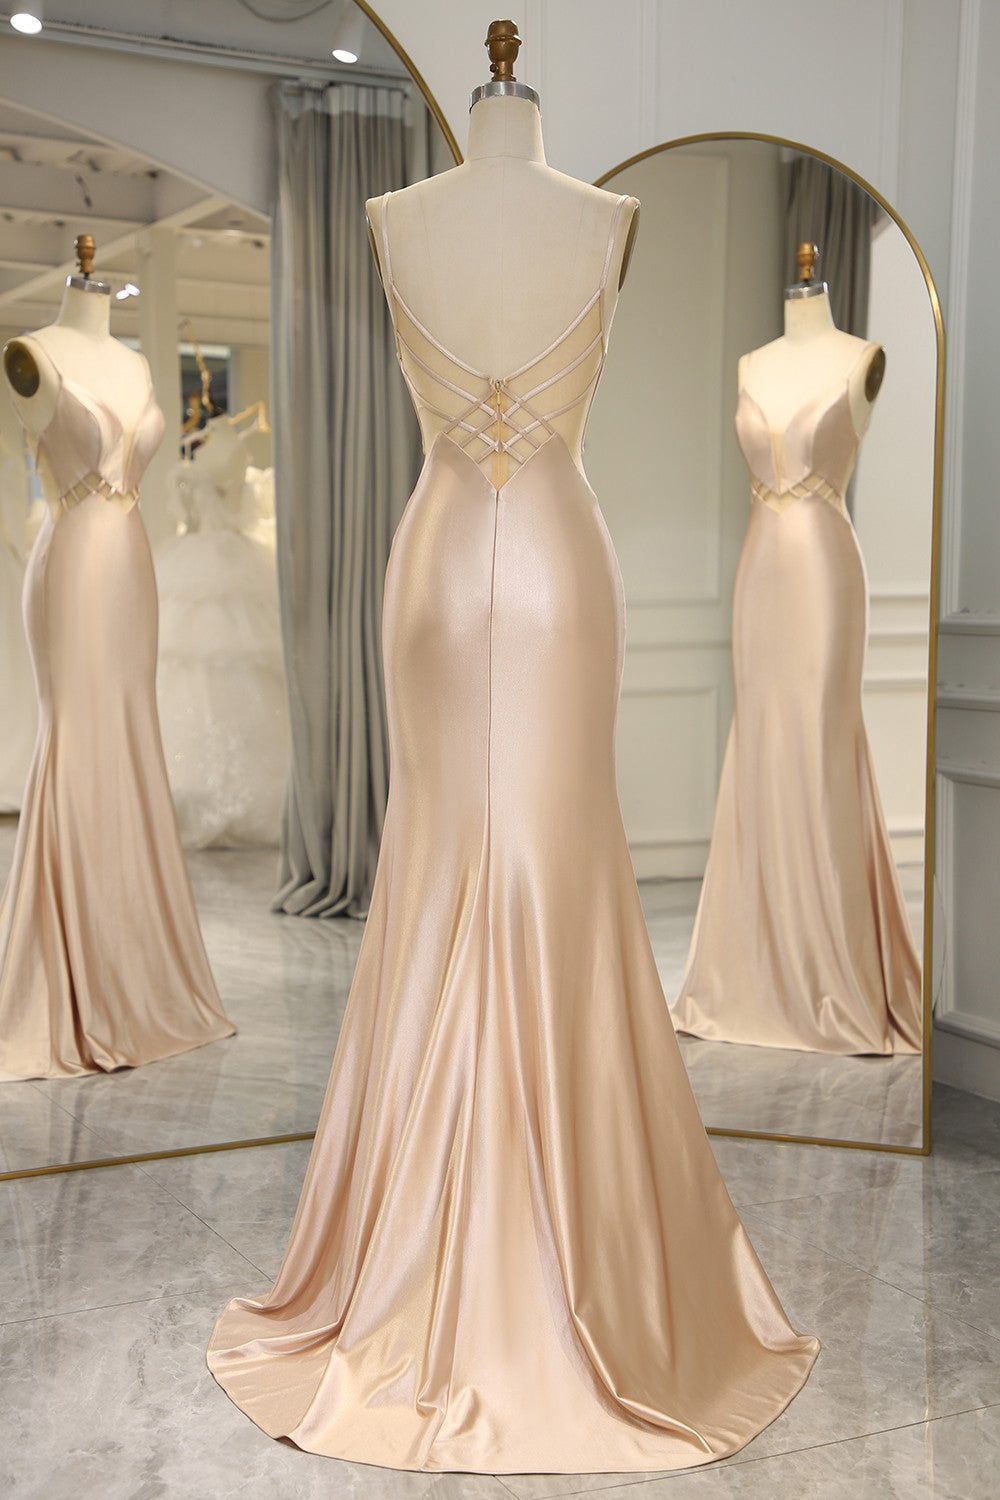 Simple Champagne Spaghetti Straps Long Mermaid Satin Corset Prom Dress outfits, Prom Dresses For Girls